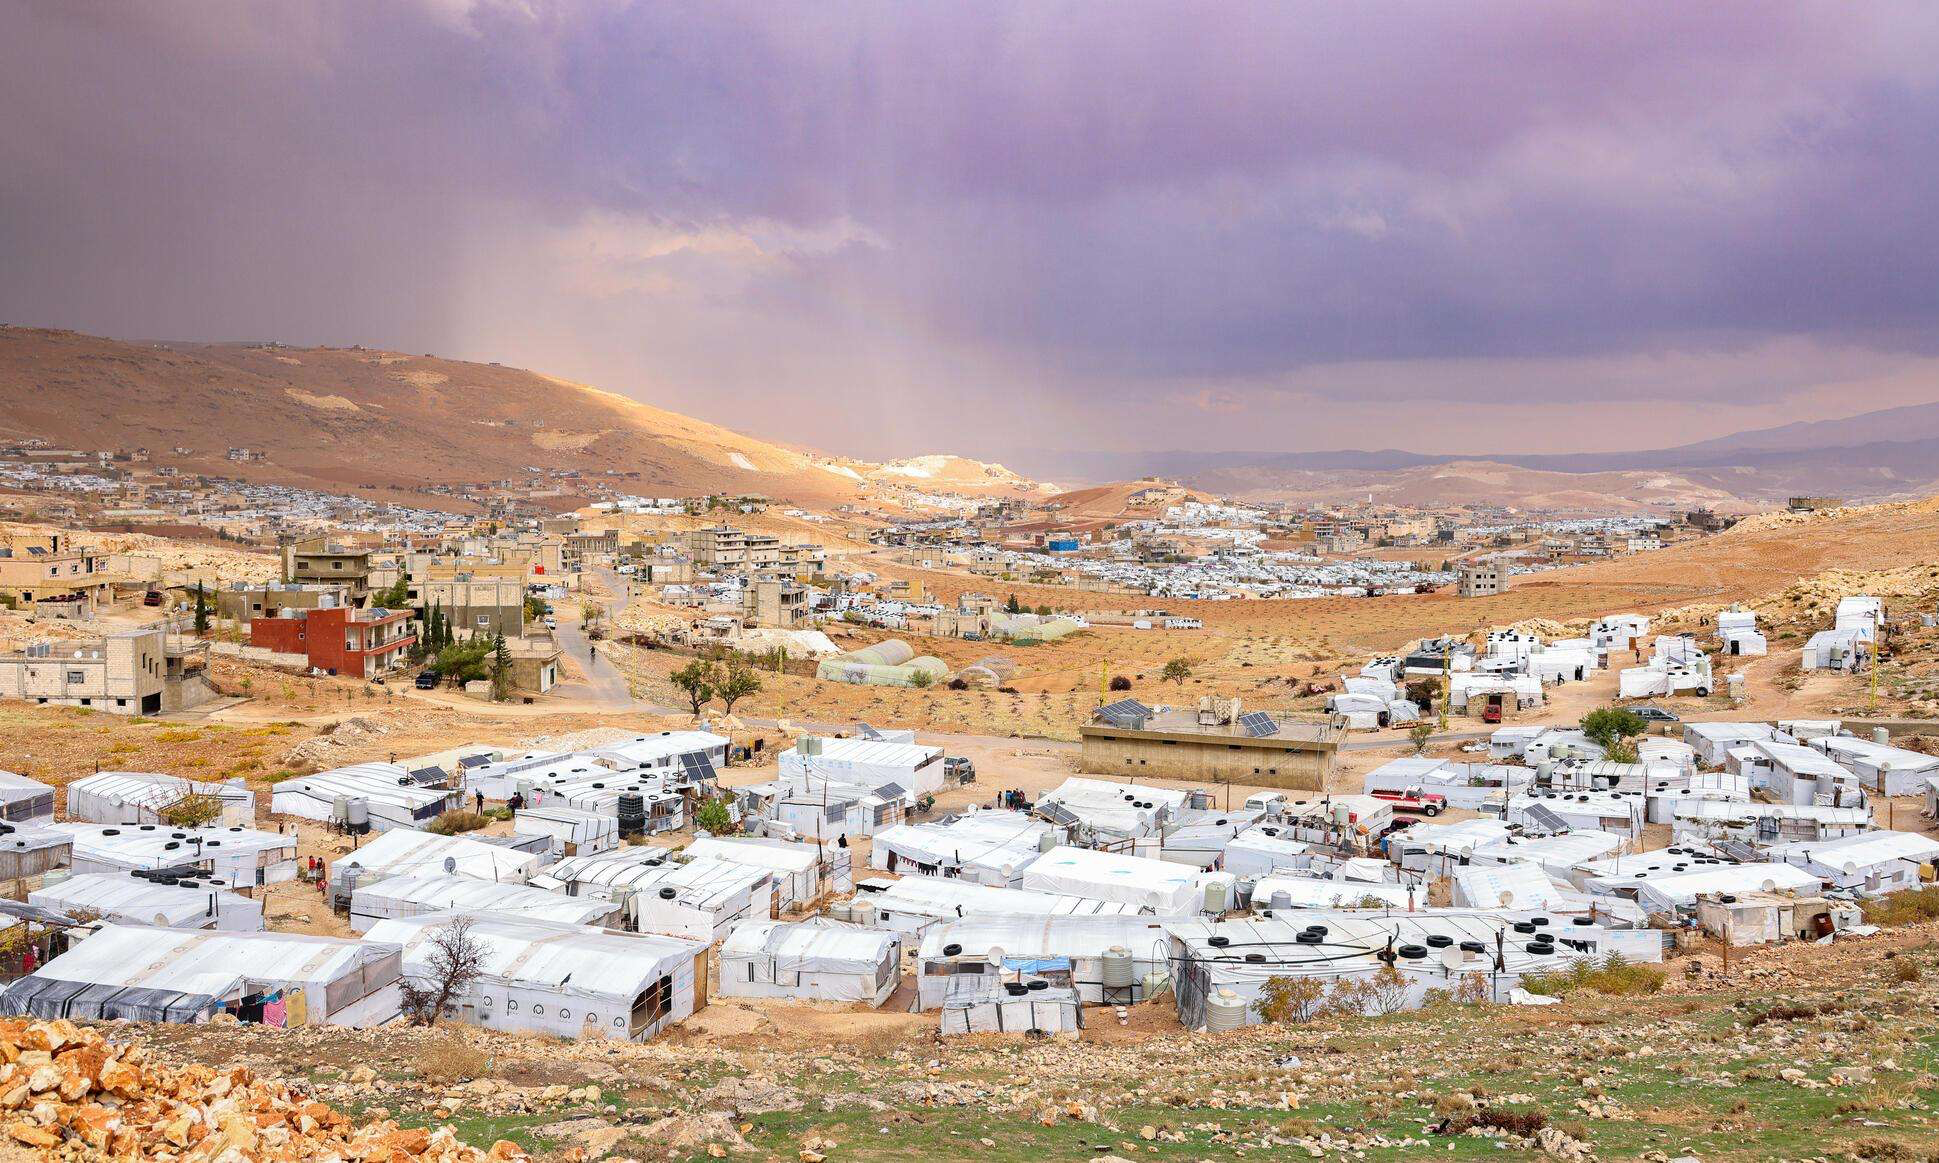 Time for the displaced Syrians to return, Lebanon can’t shoulder this Burden indefinitely